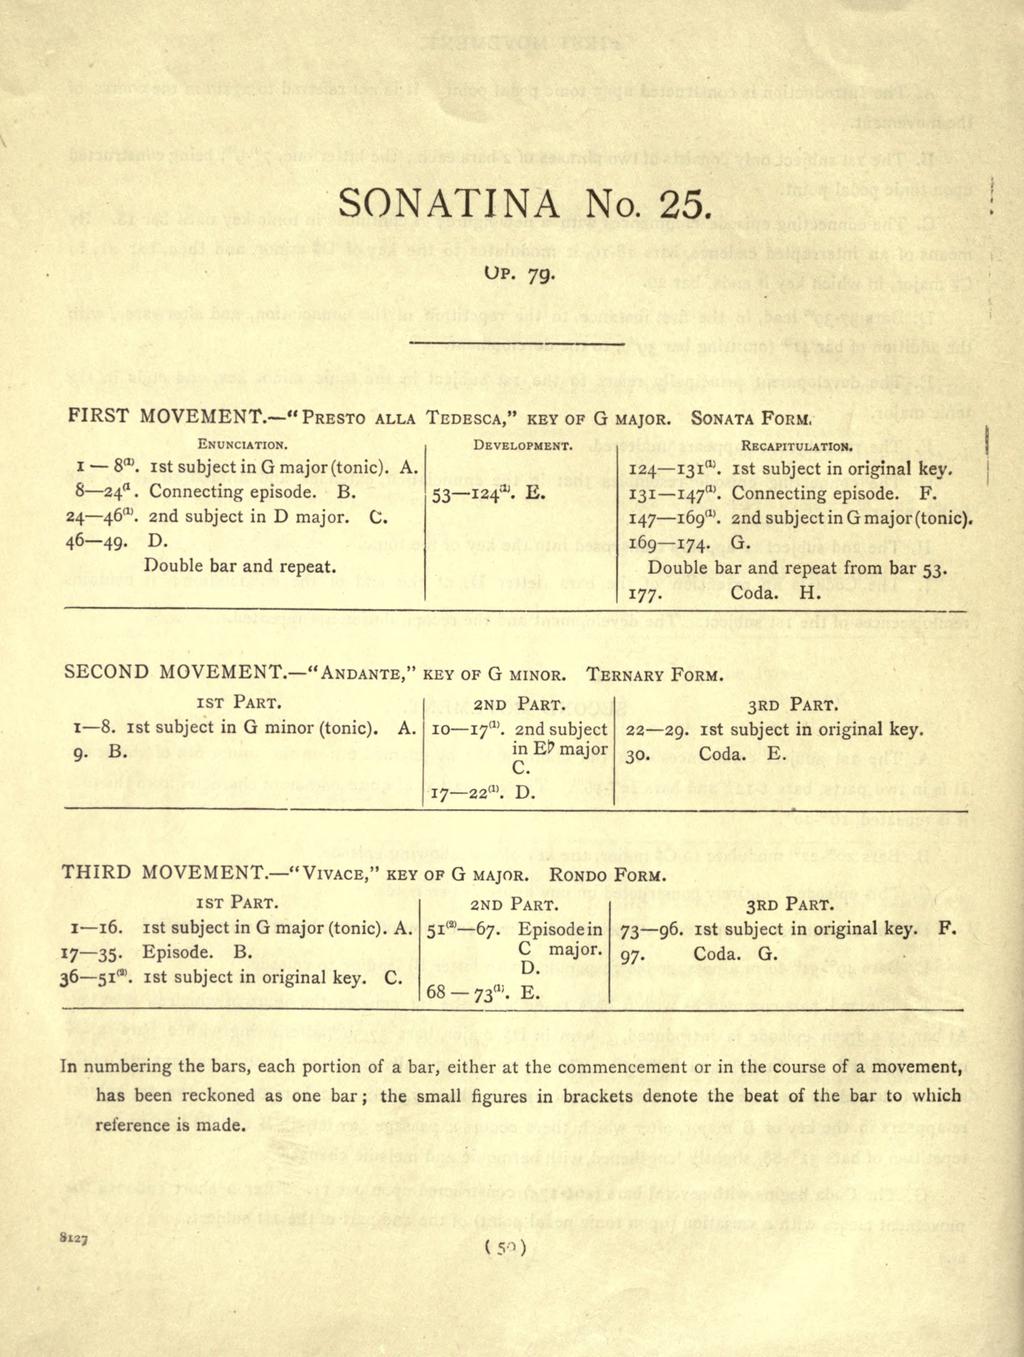 SONATINA No. 25. UP. 79. FIRST MOVEMENT. "PRESTO ALLA TEDESCA," KEY OF G MAJOR. SONATA FORM. I 8 m. ist subject in G major (tonic). A. 8 24**. Connecting episode. B. 24 46'". and subject in D major.